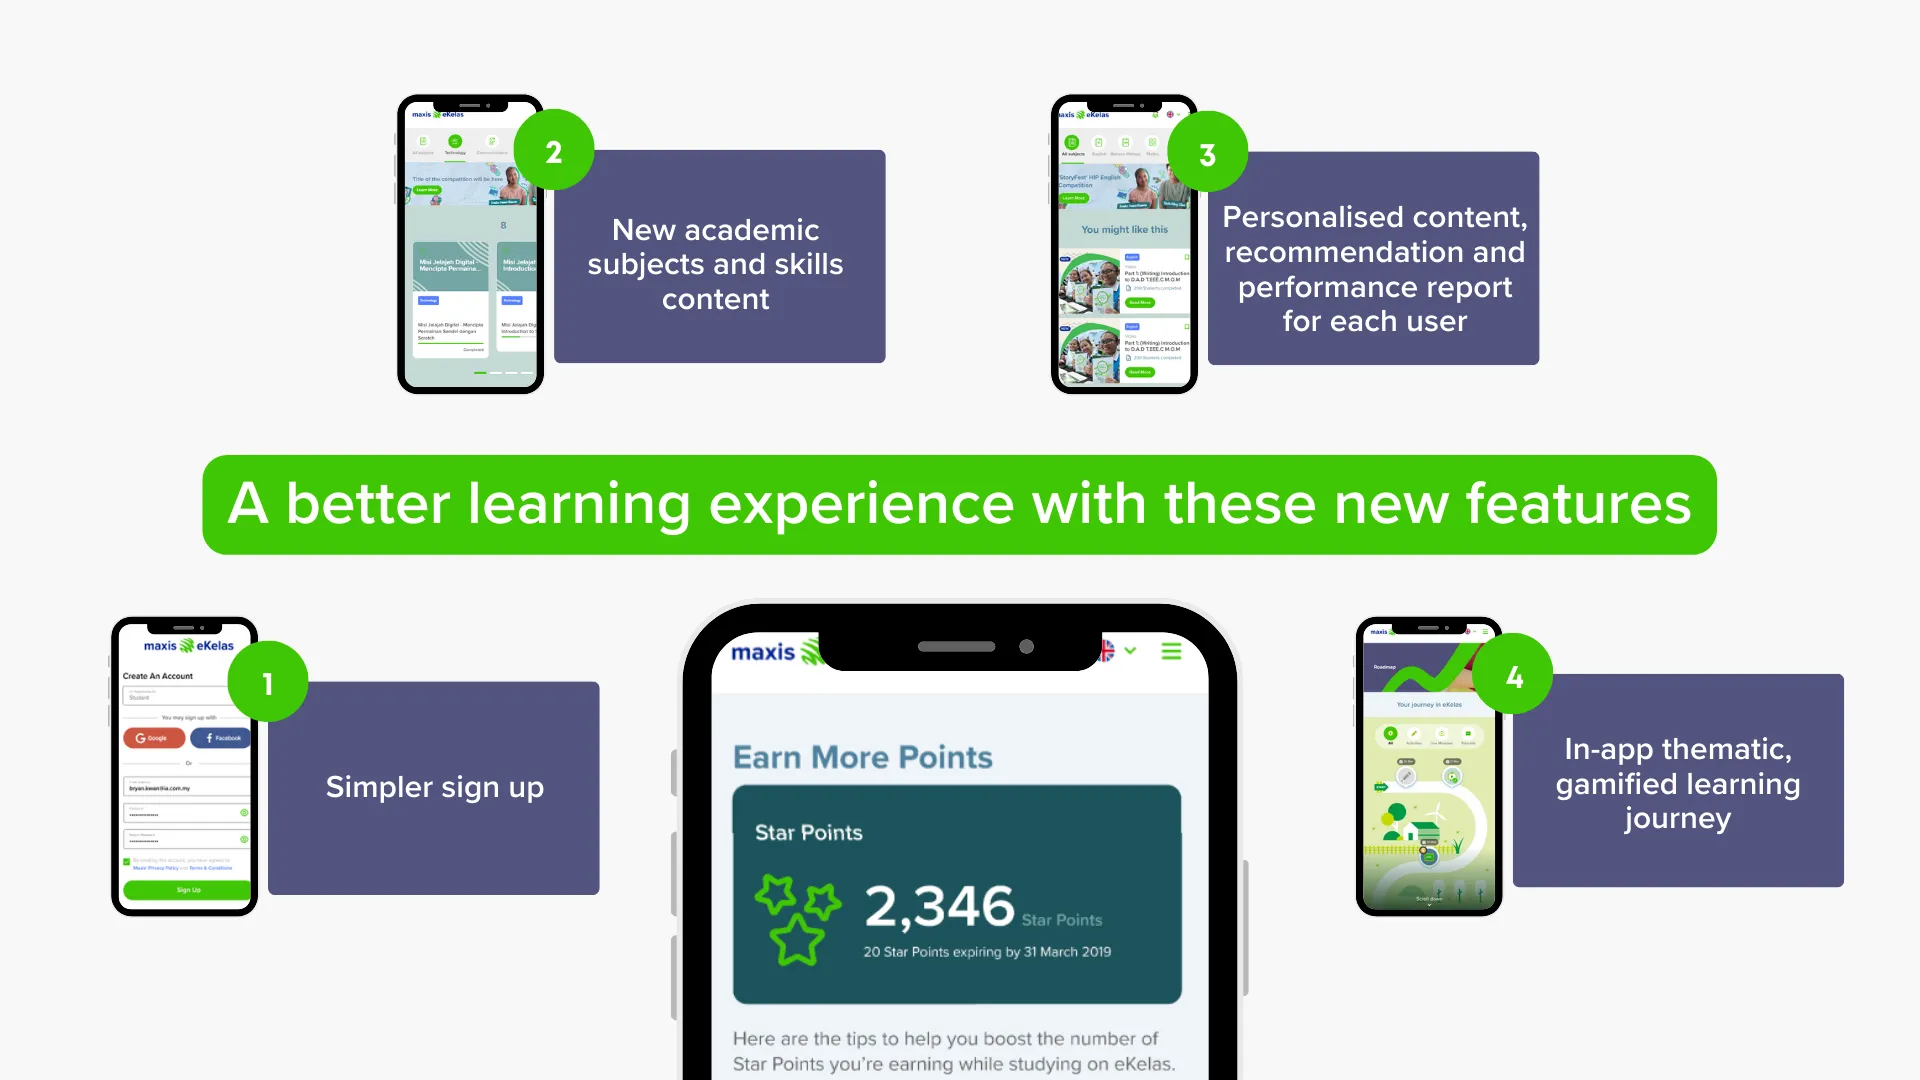 A Better Learning Experience with new features